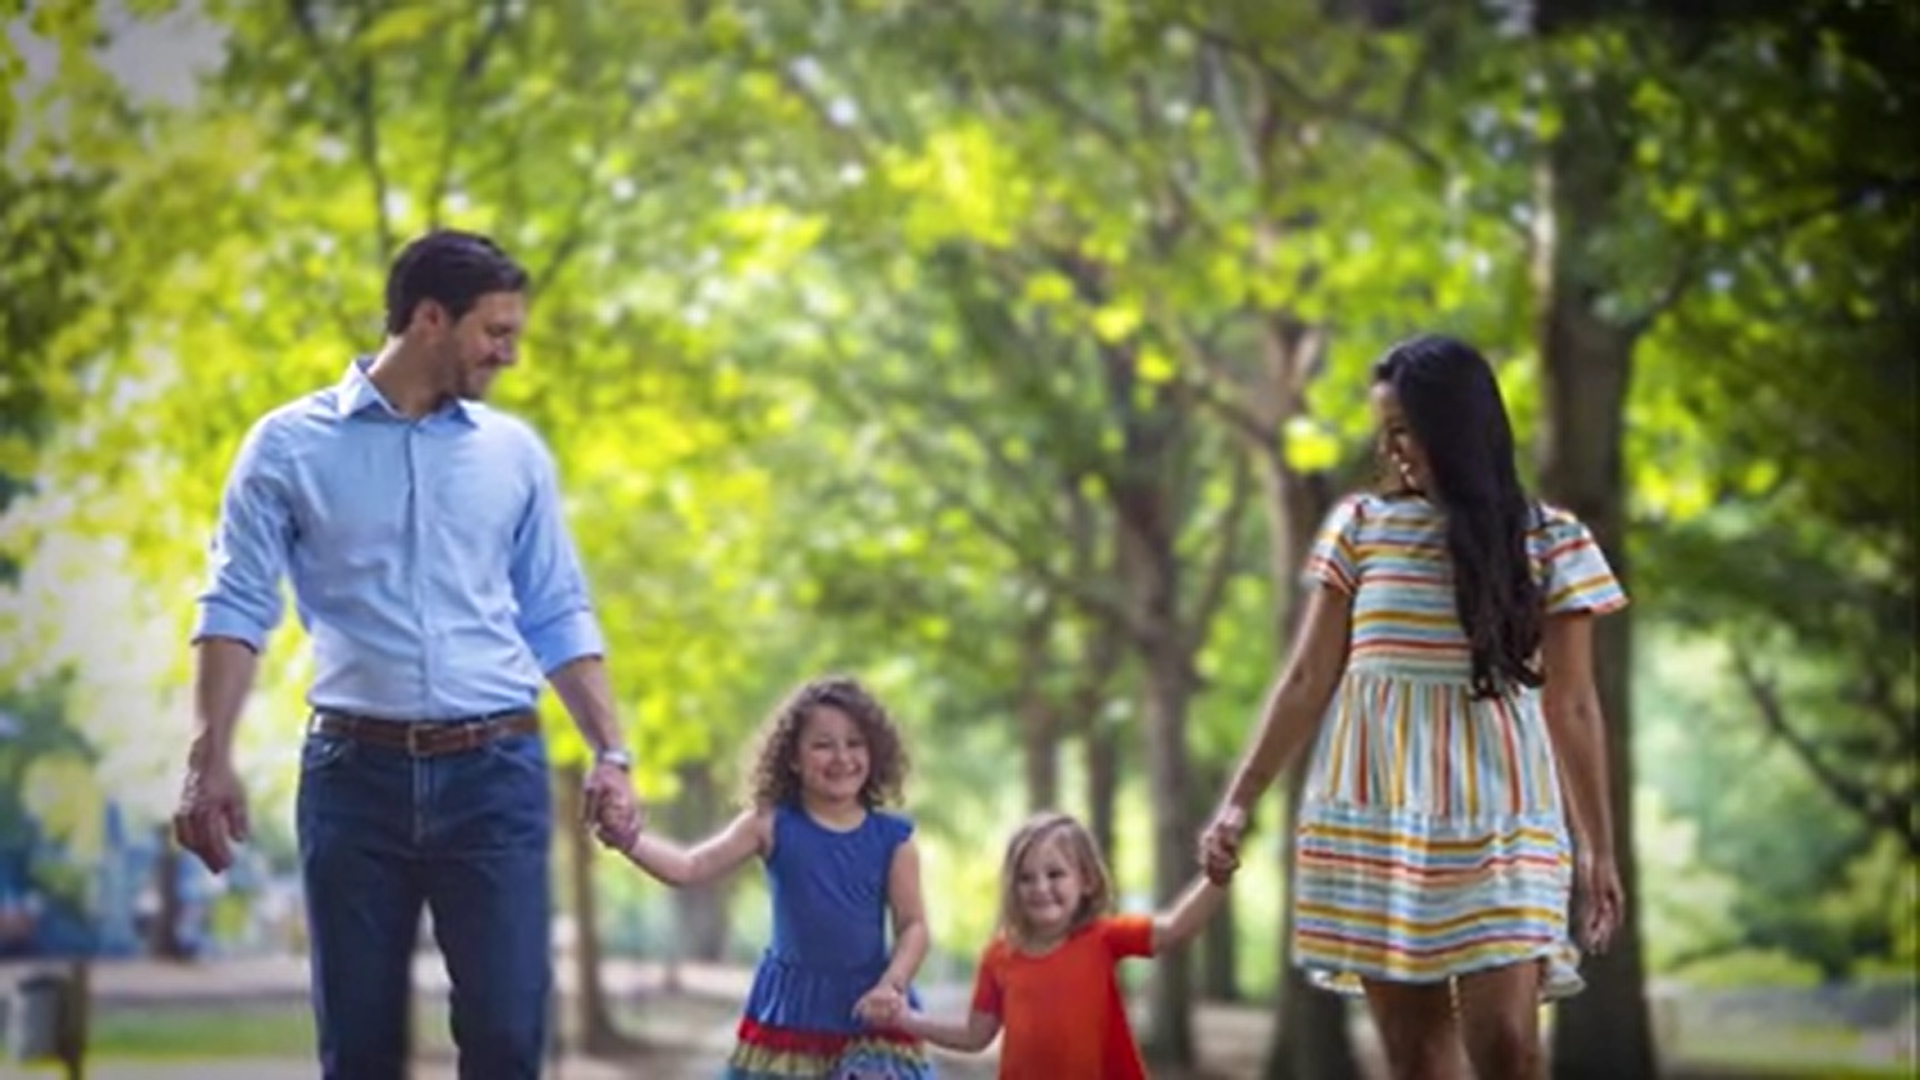 Pat Harrigan pictured with his family in his campaign video